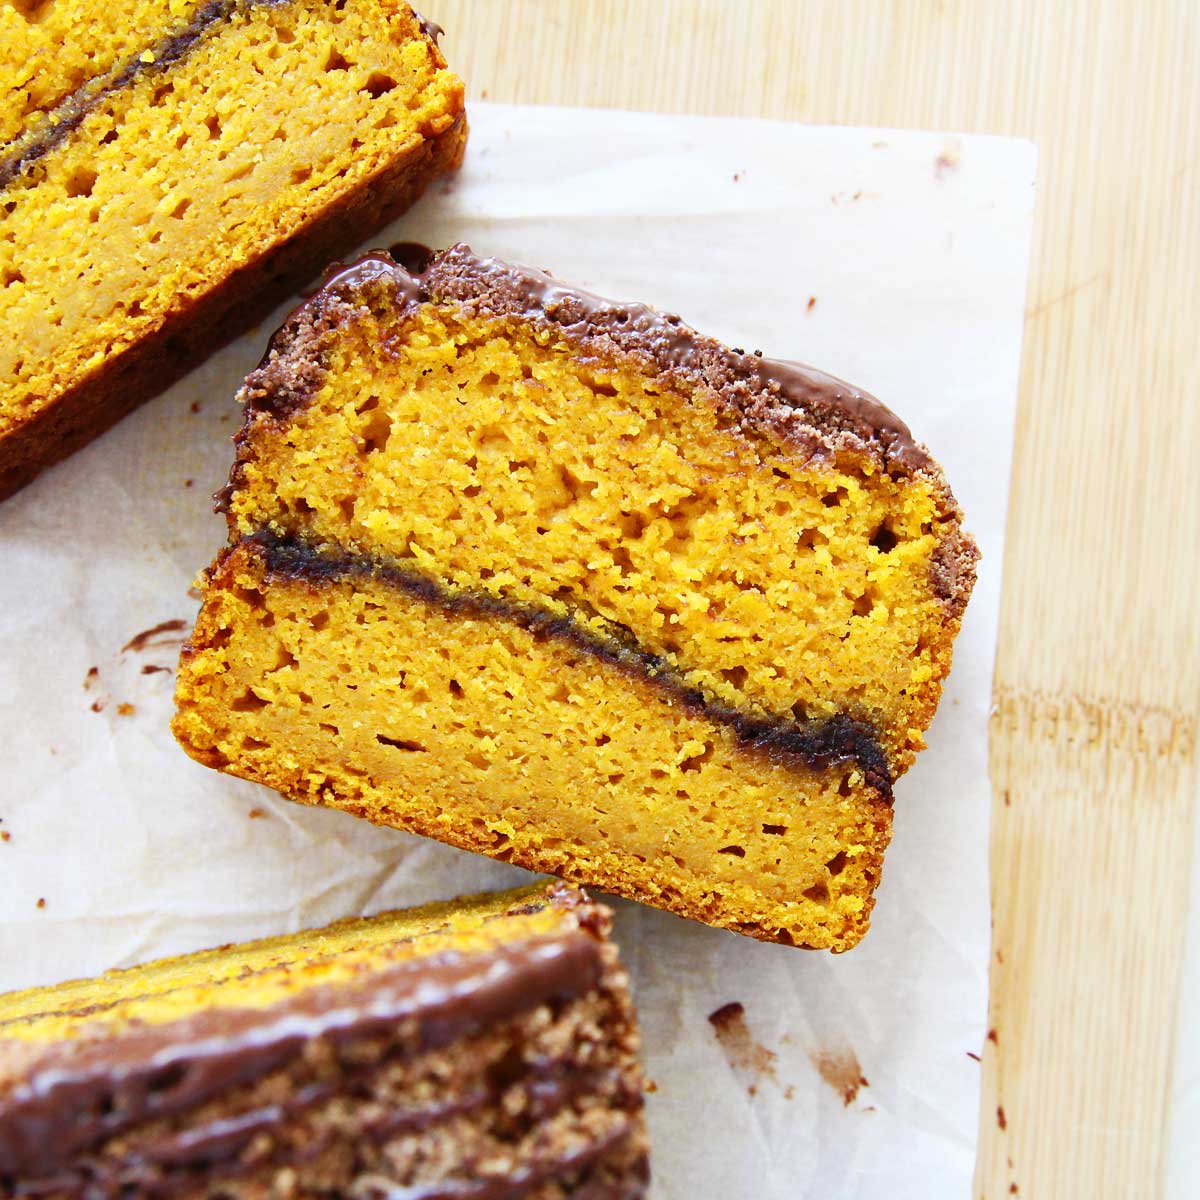 Nutella Swirl Pumpkin Bread with Chocolate Crumble Topping - topping variations